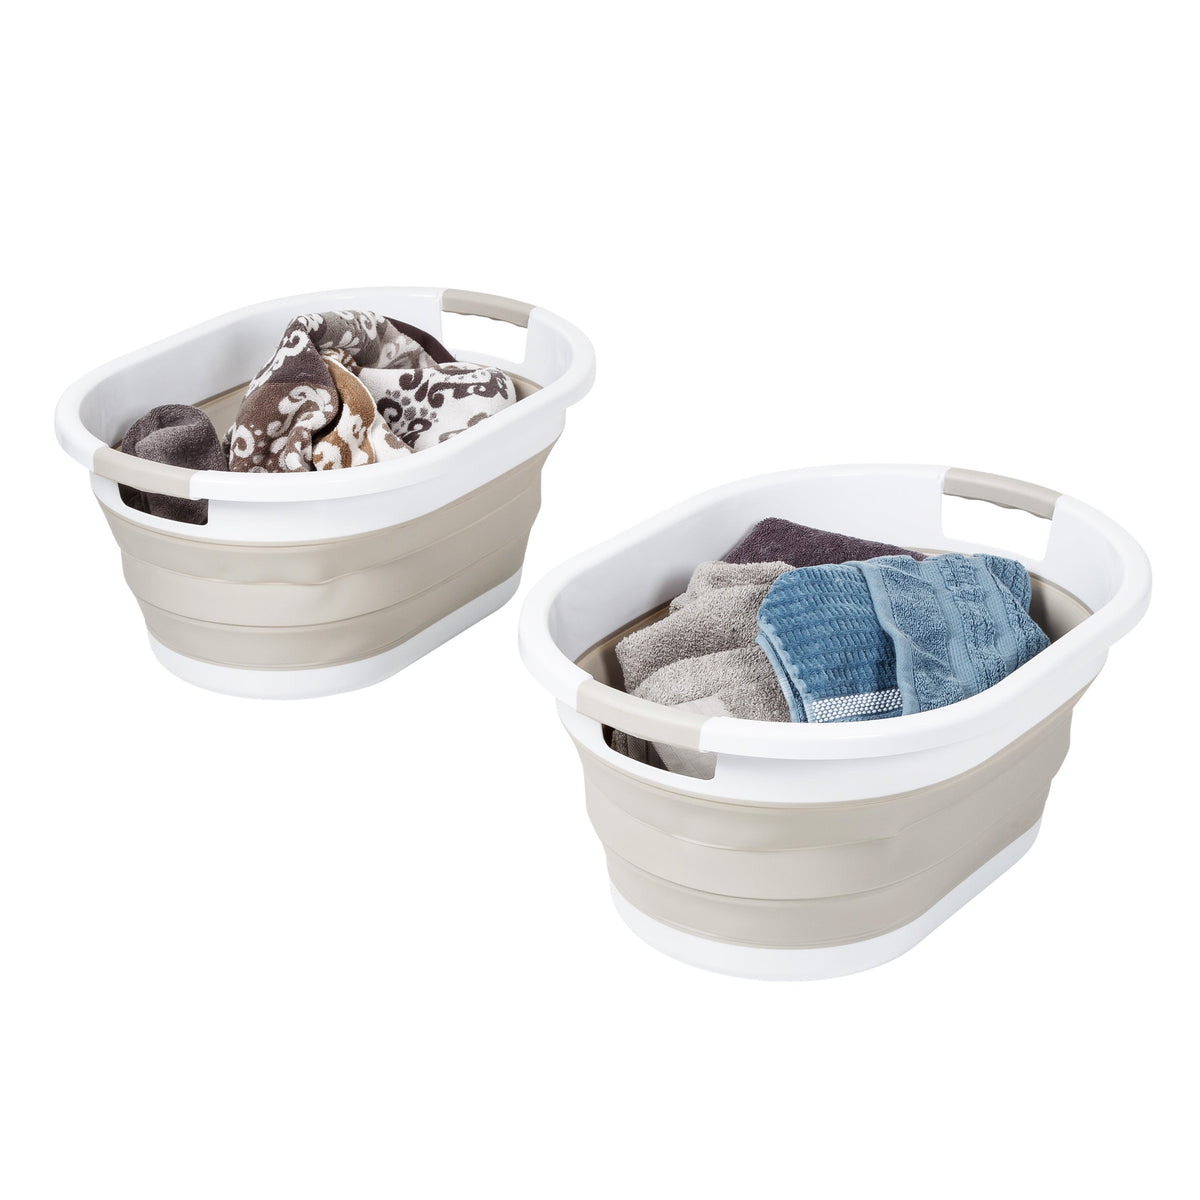 Dark Gray/White Collapsible Rubber Laundry Baskets (Set of 2)